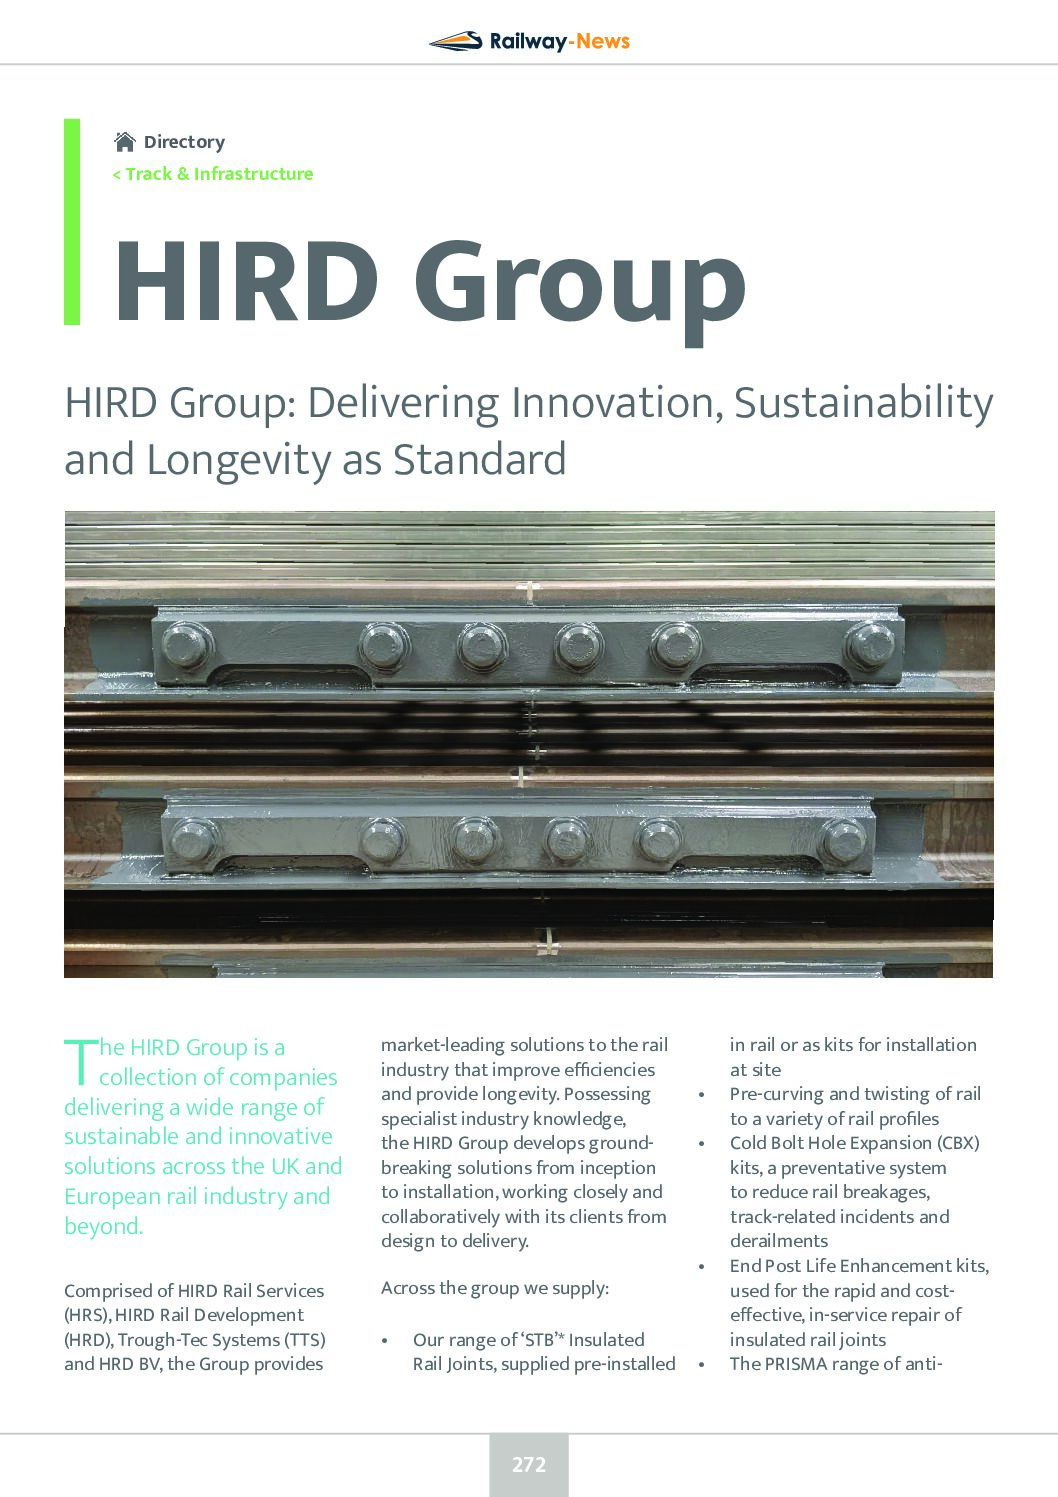 HIRD Group: Delivering Innovation, Sustainability and Longevity